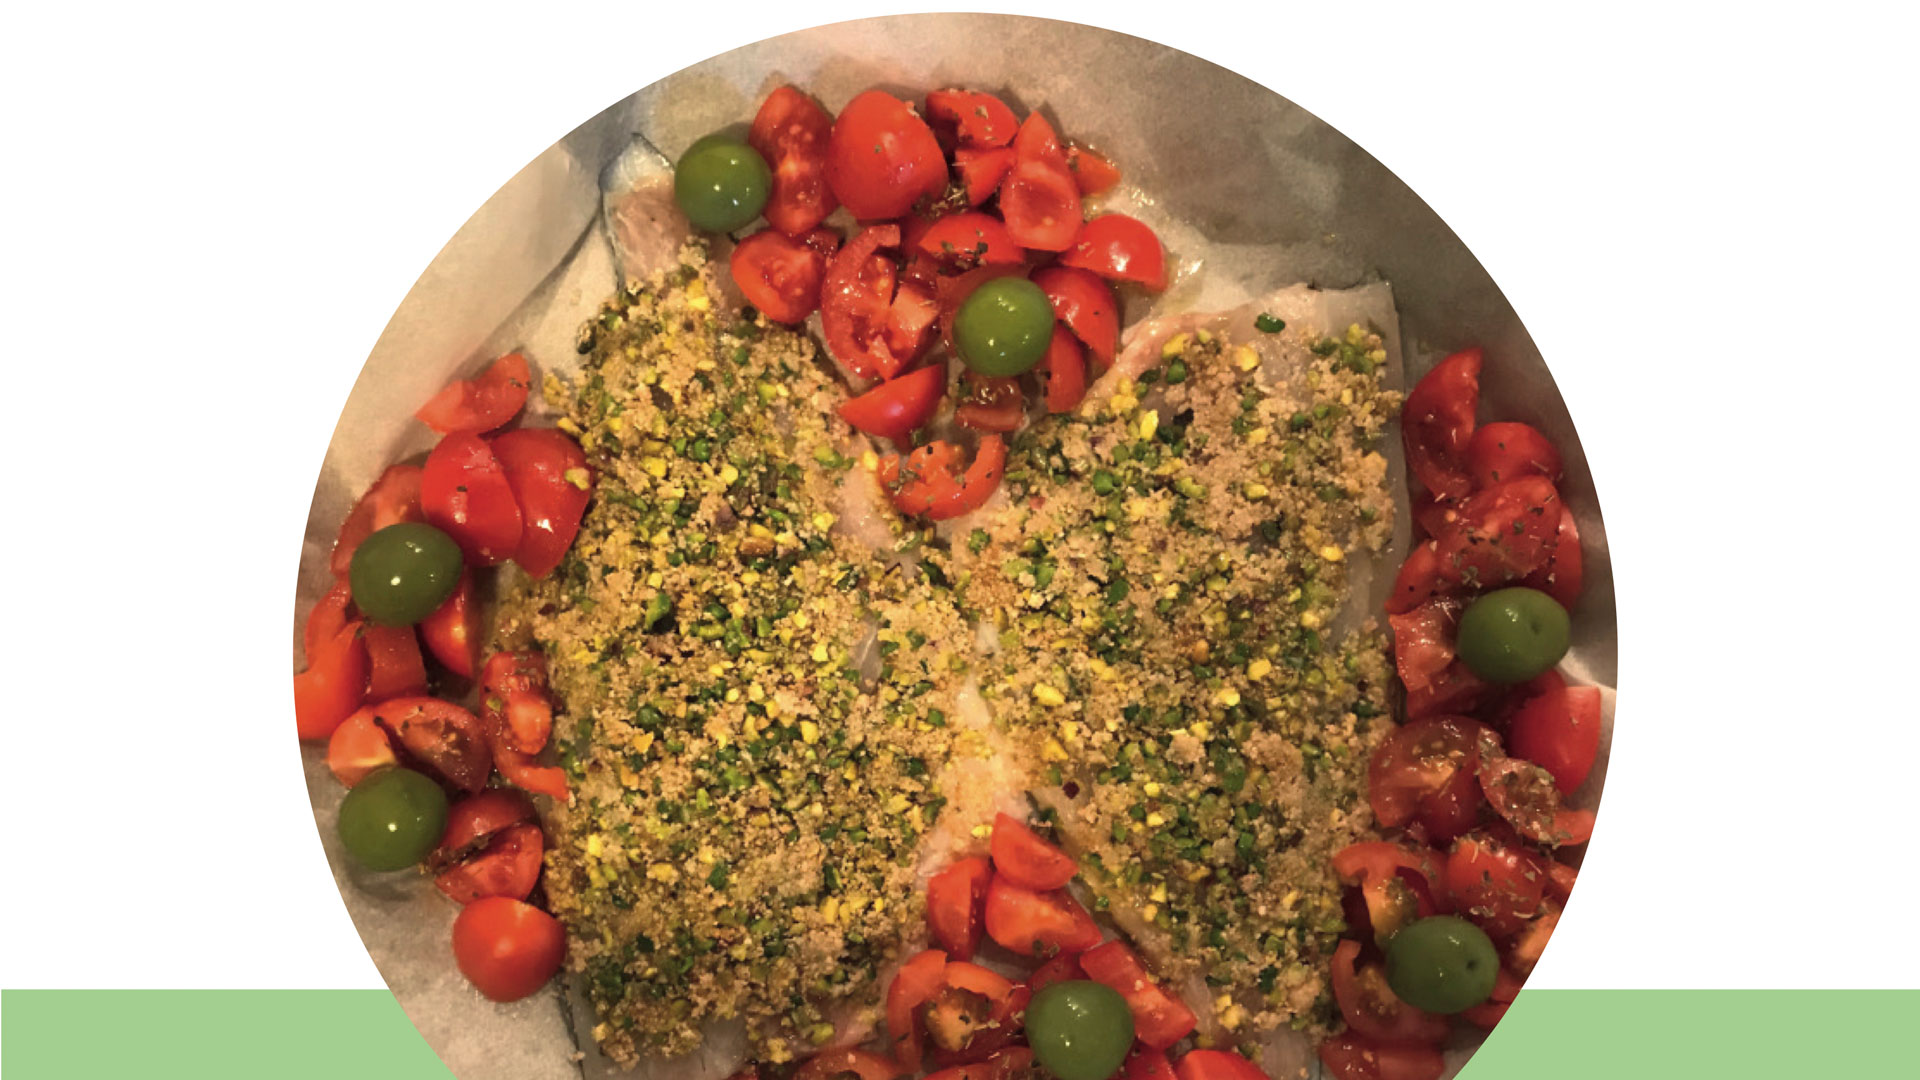 Baked Orata in Pistachios Crust with Tomatoes and Olives